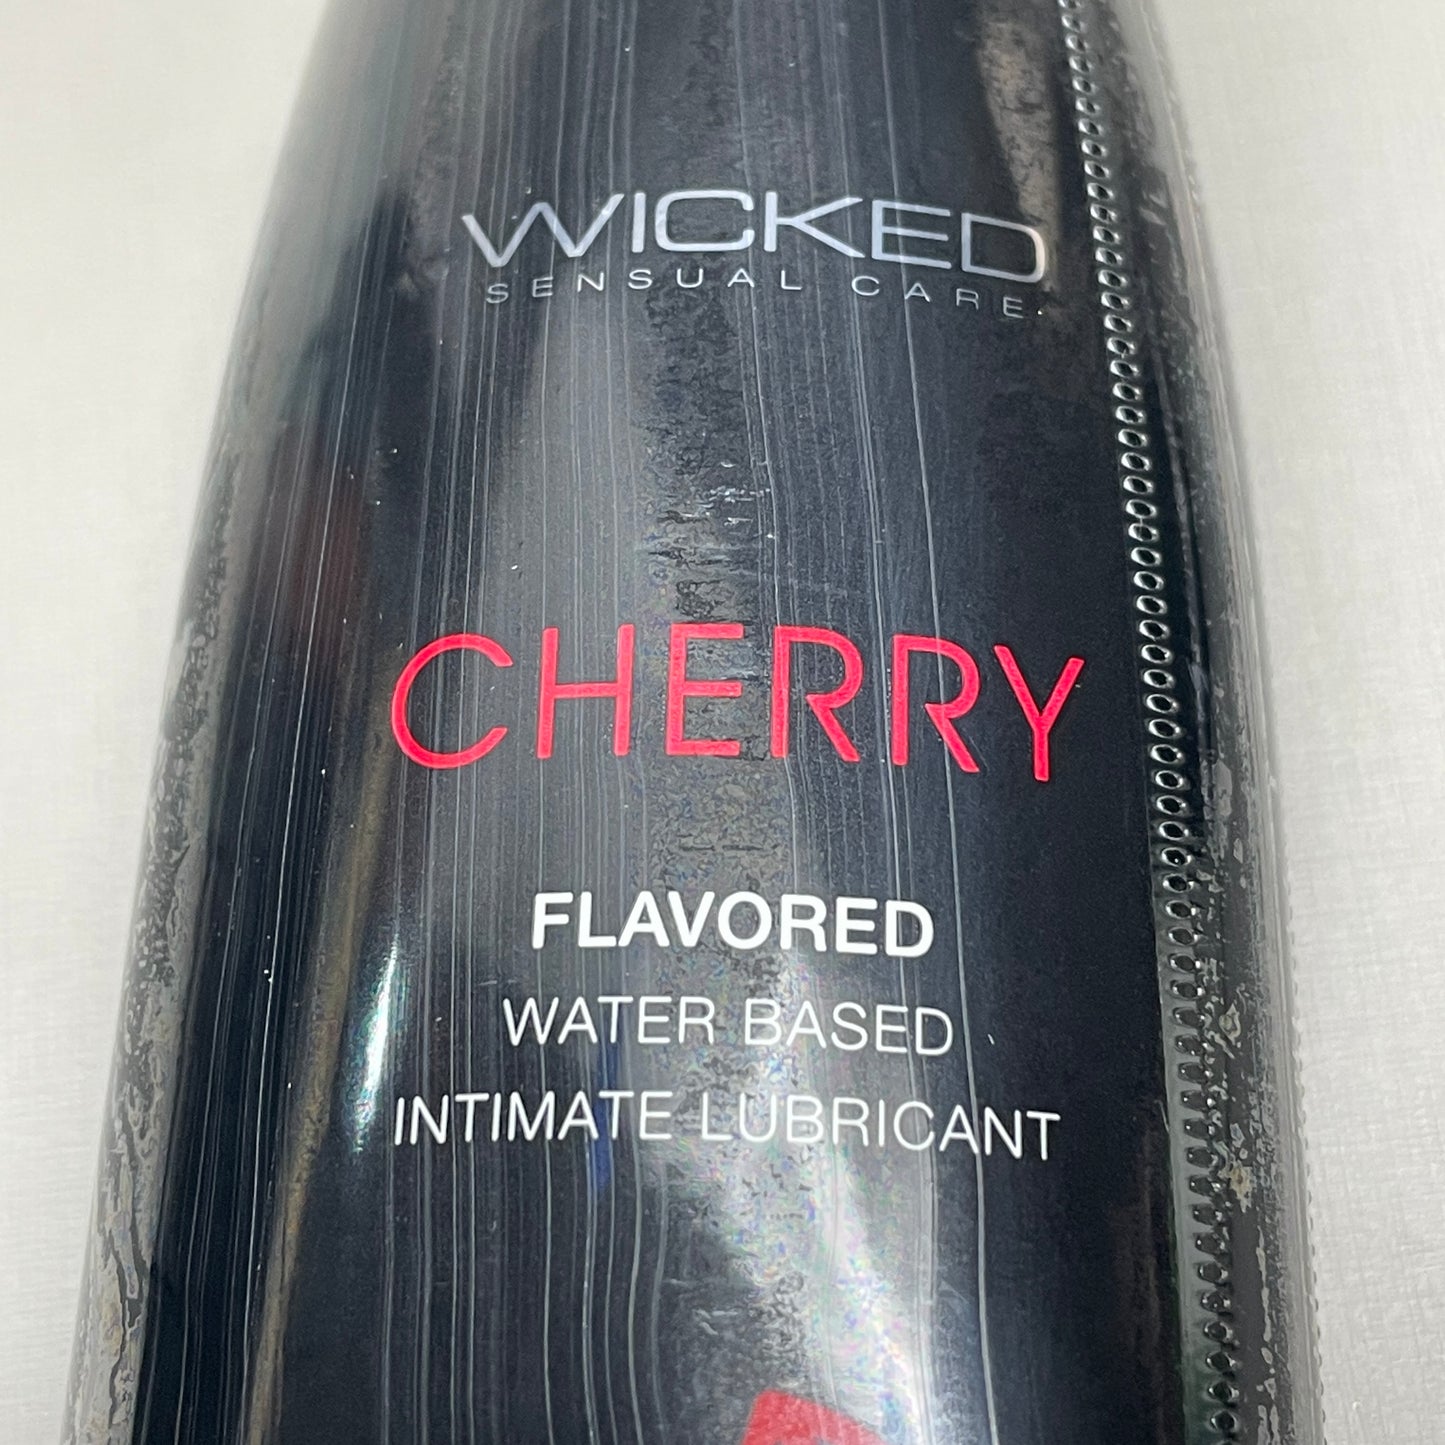 WICKED SENSUAL CARE Cherry Flavored Water Based Intimate Lubricant 4 oz 03/24 (New)